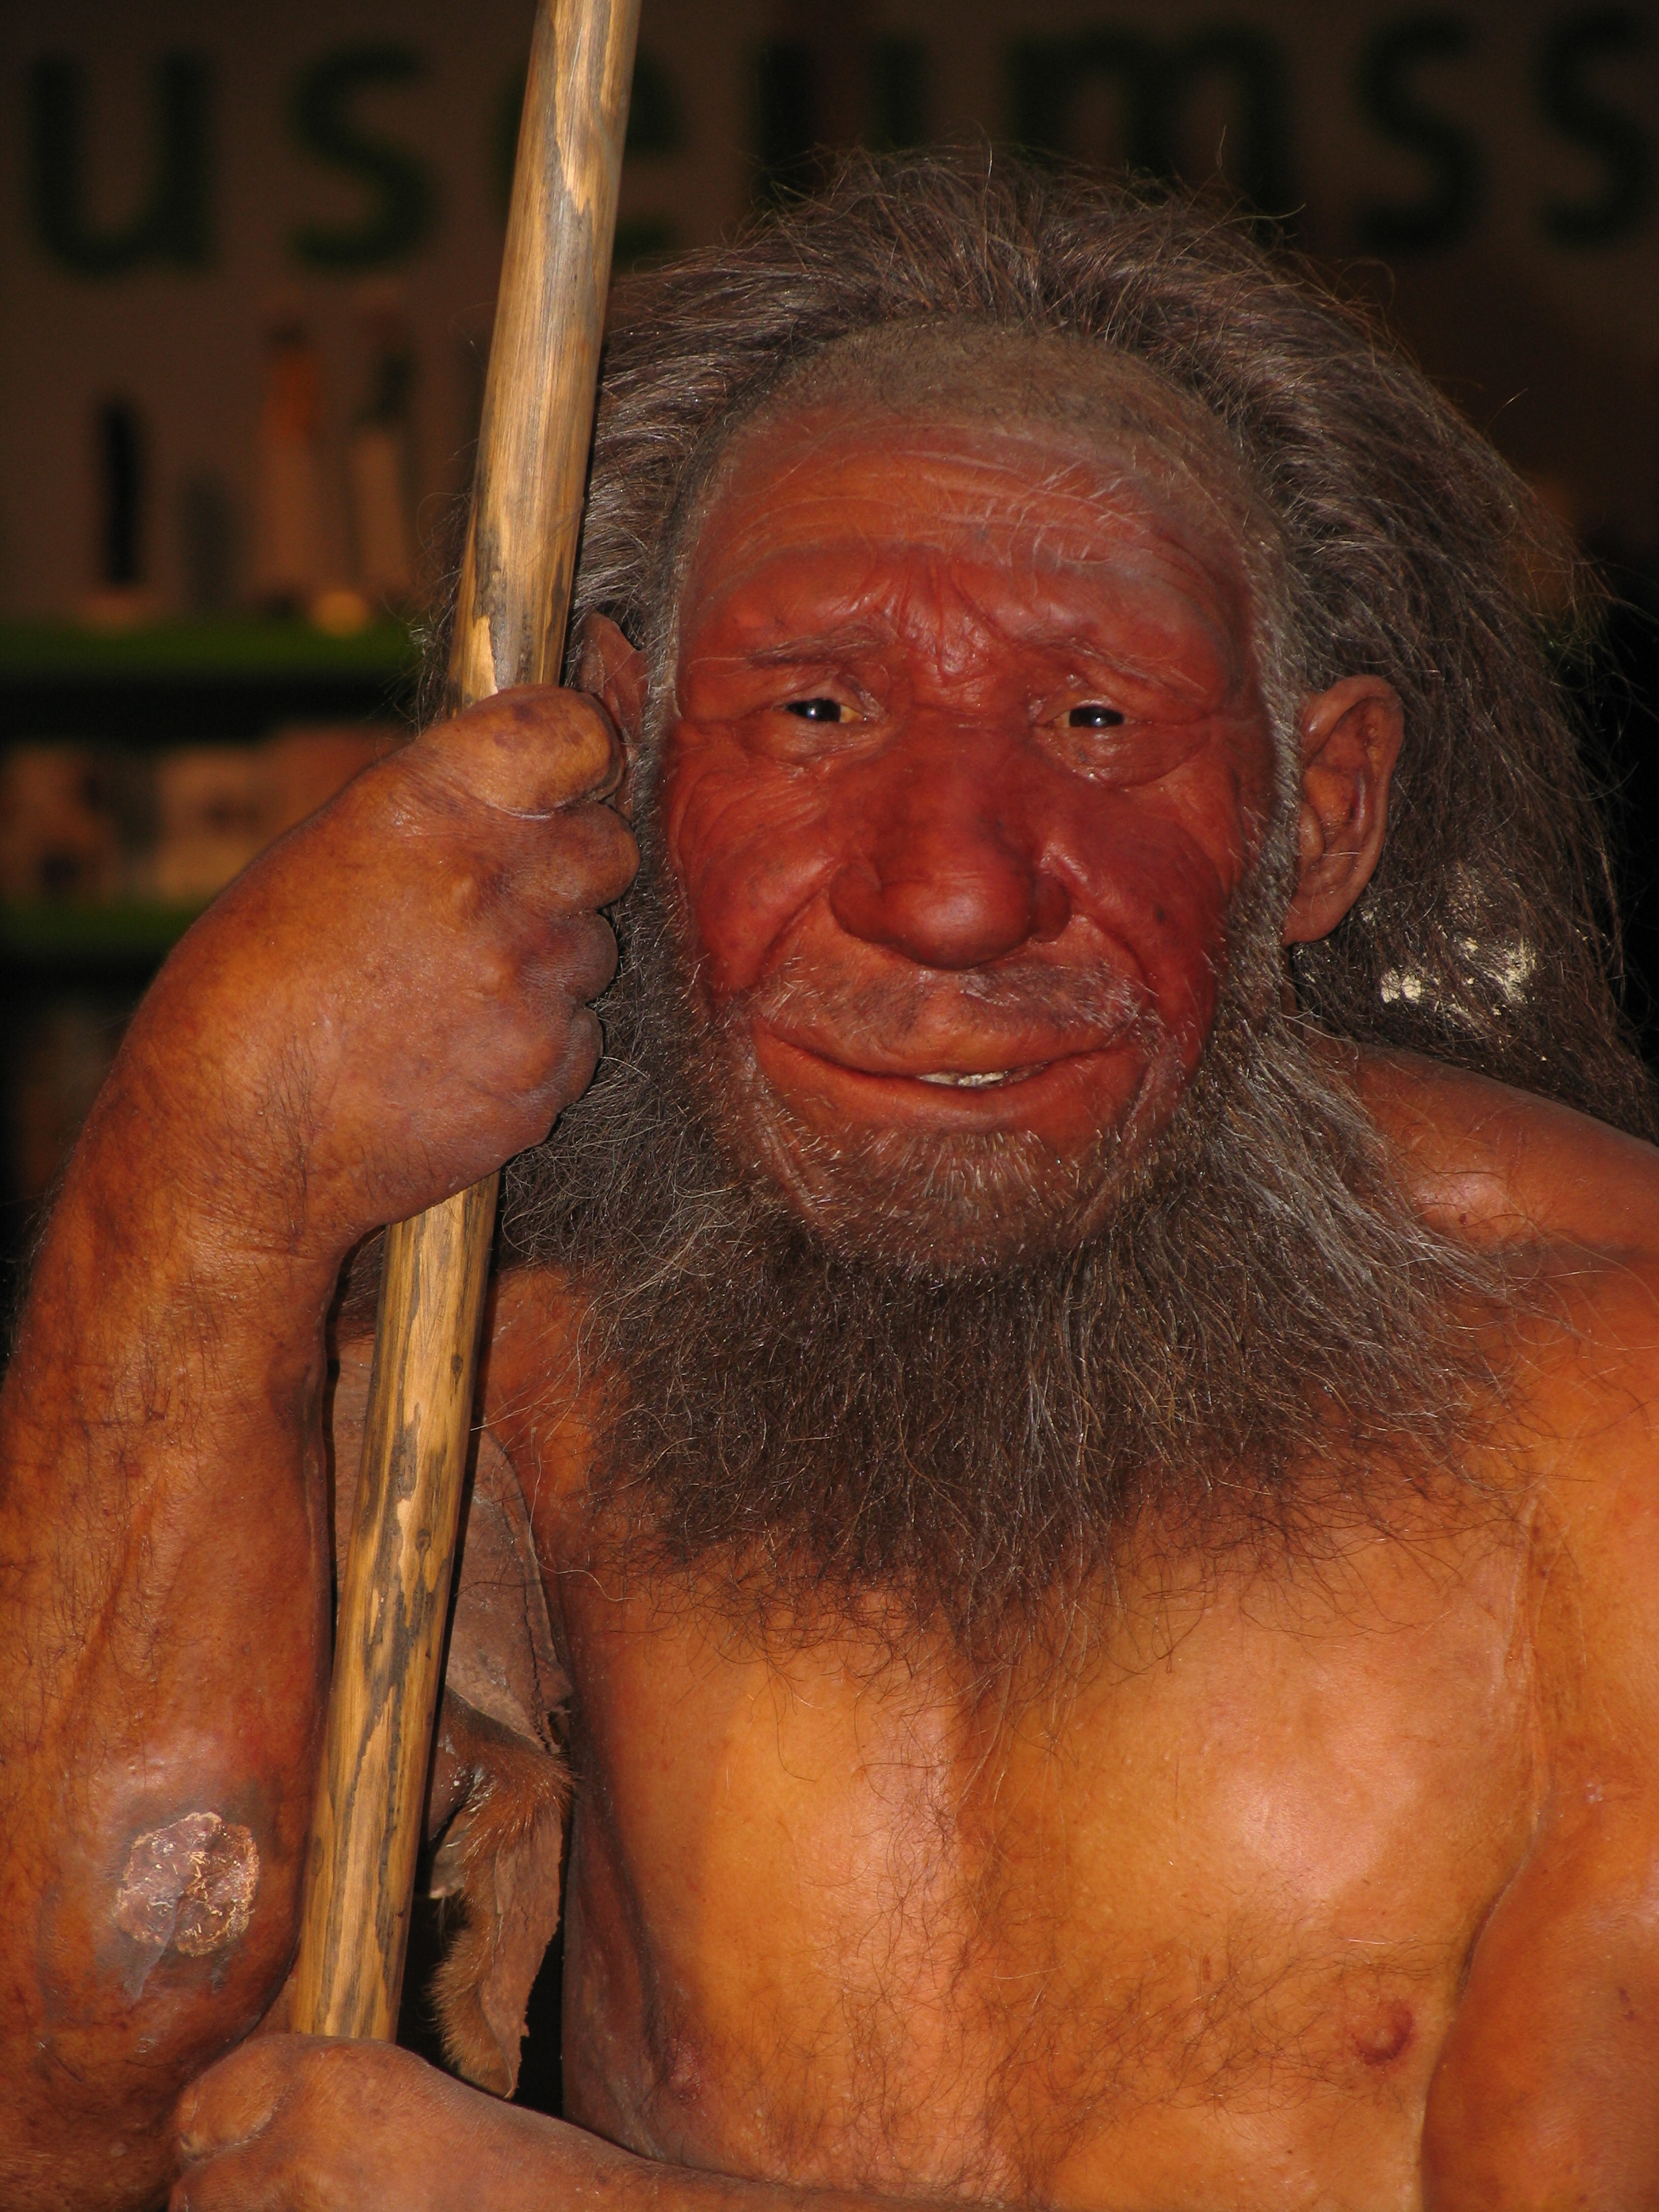 Dermoplastic reconstruction of a Neanderthal